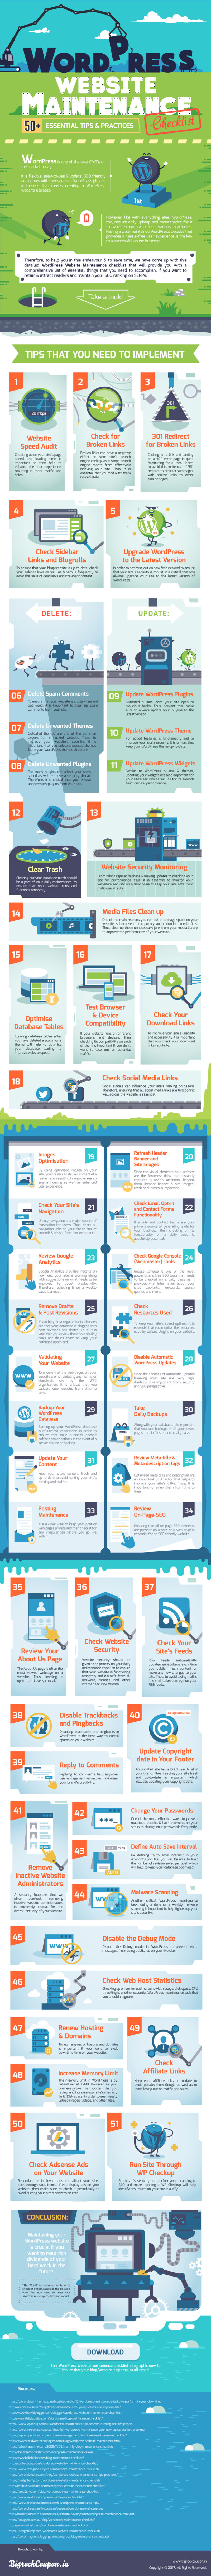 How To Effectively Maintain Your WordPress Website? [Infographic]